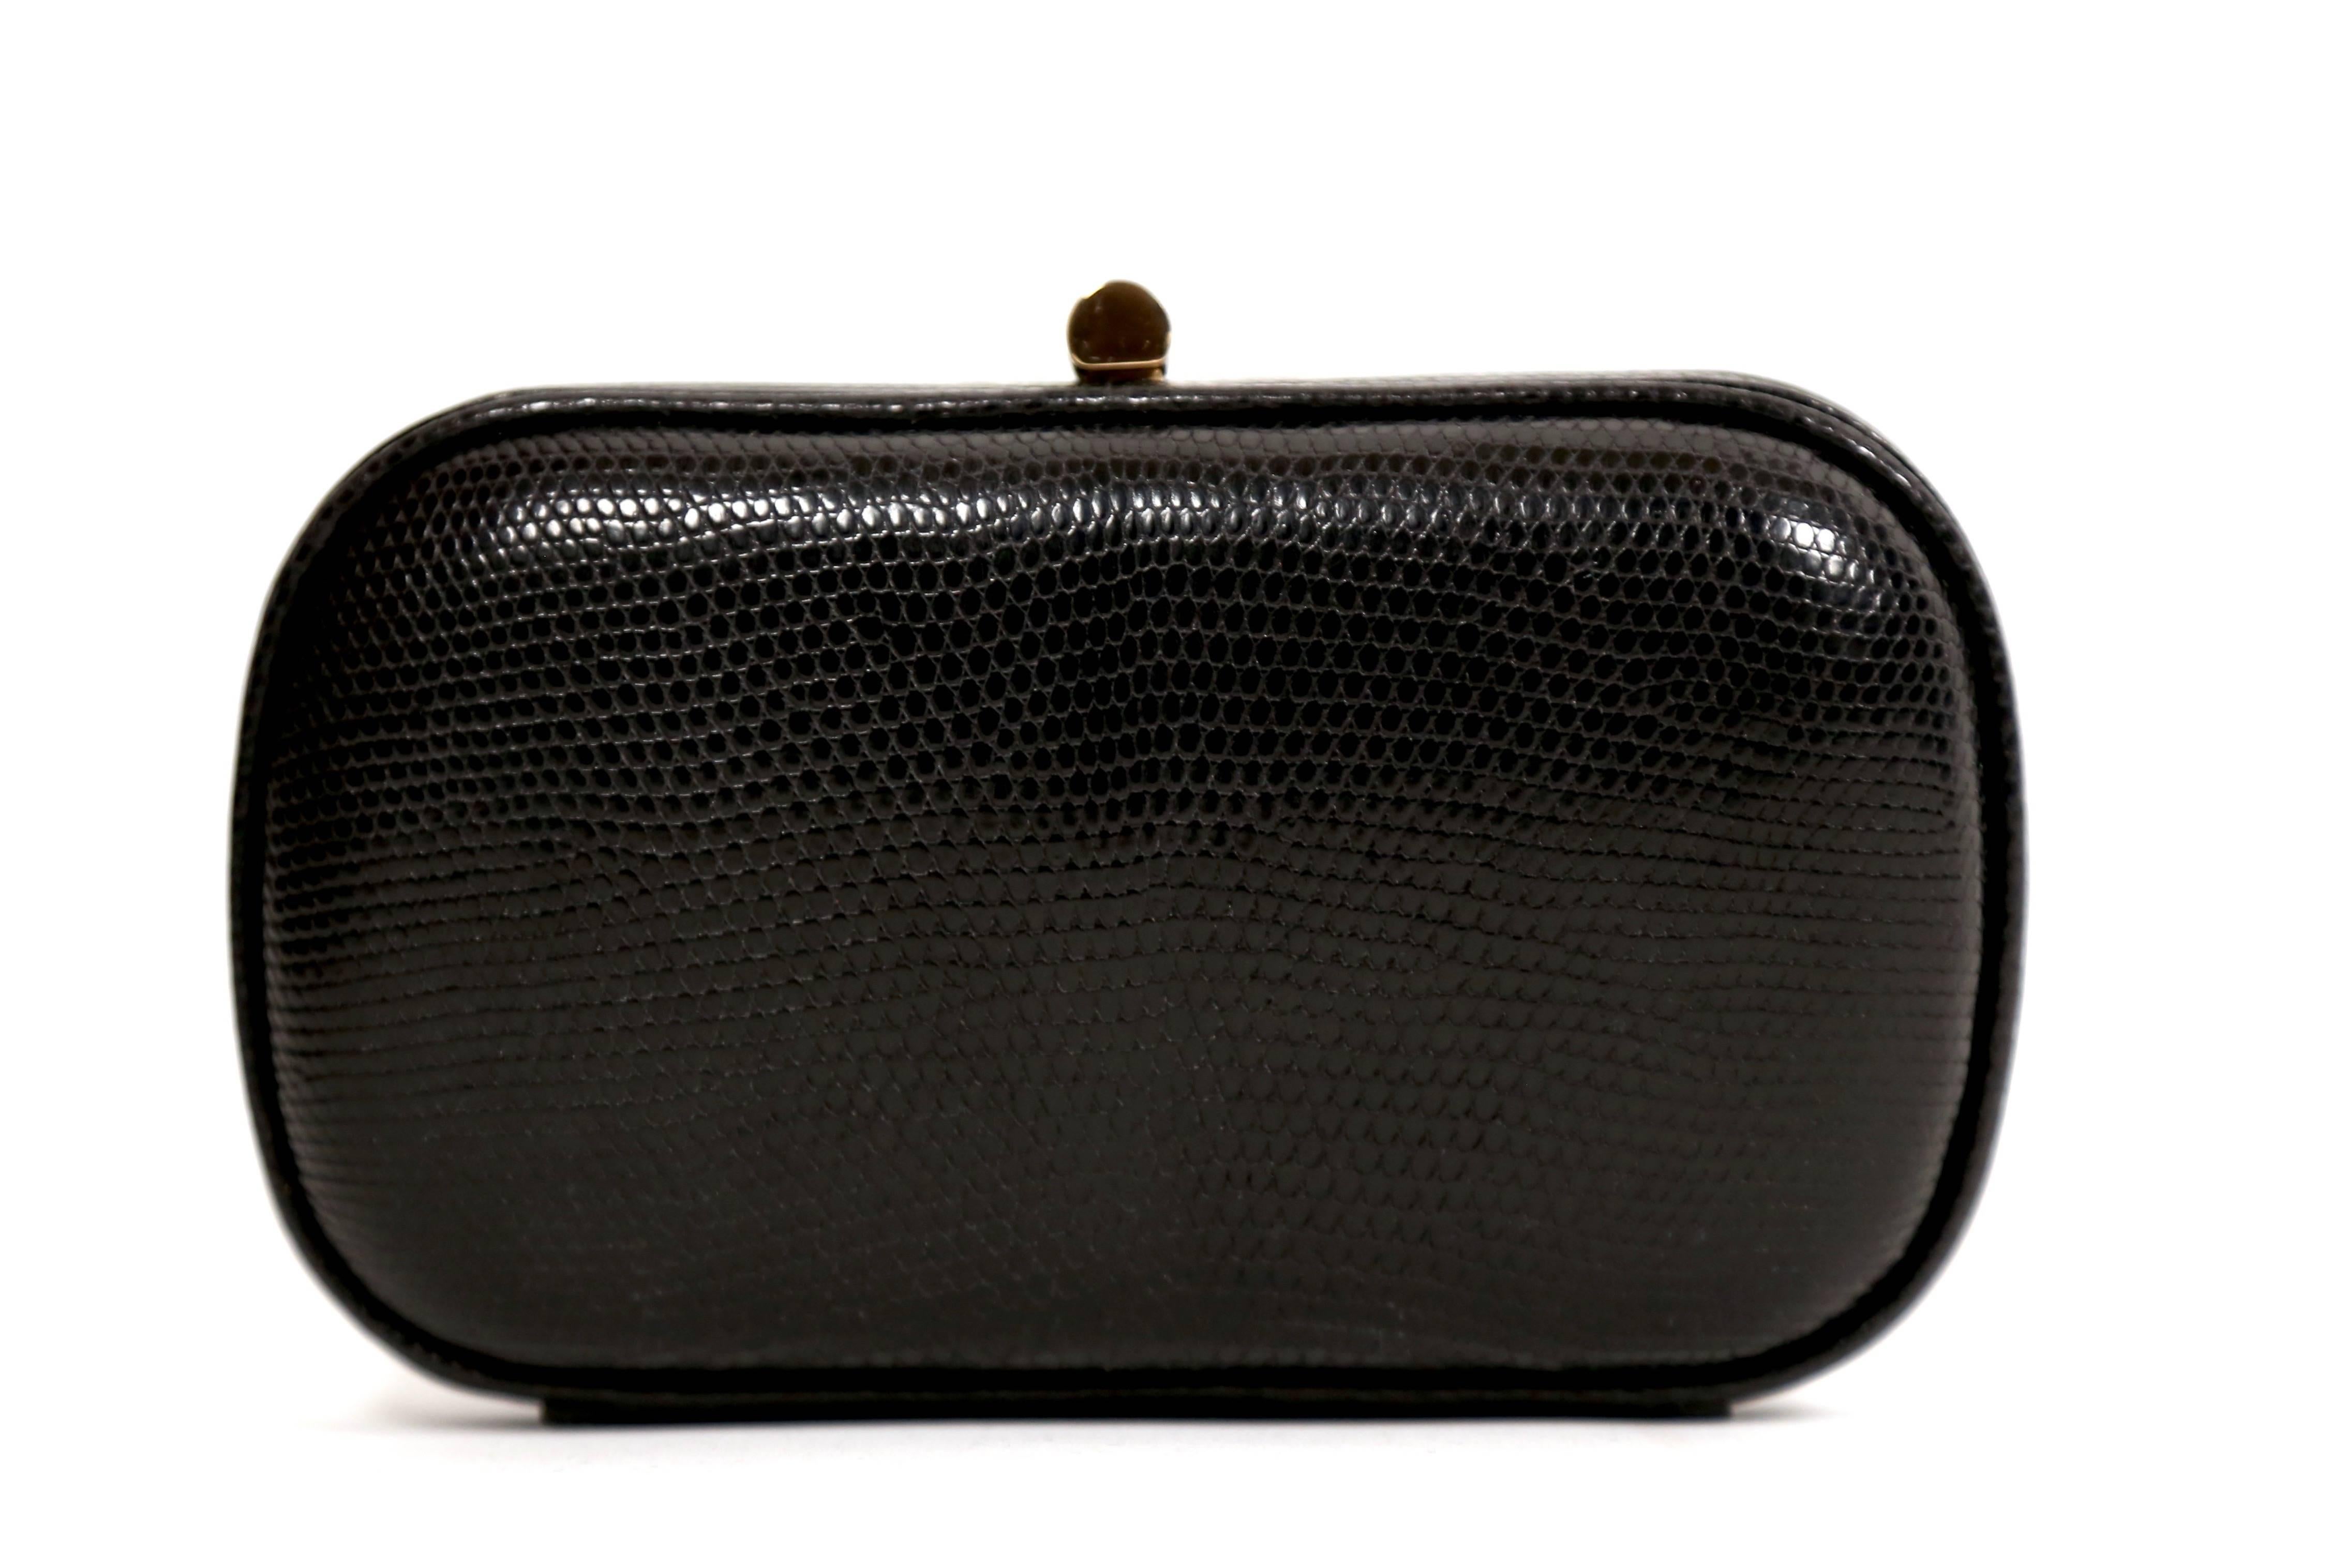 Black karung lizard clutch with gold-toned hardware, black satin lining and push-lock closure designed by Bottega Veneta dating to the 1980's.  Approximate measurements: 6.25